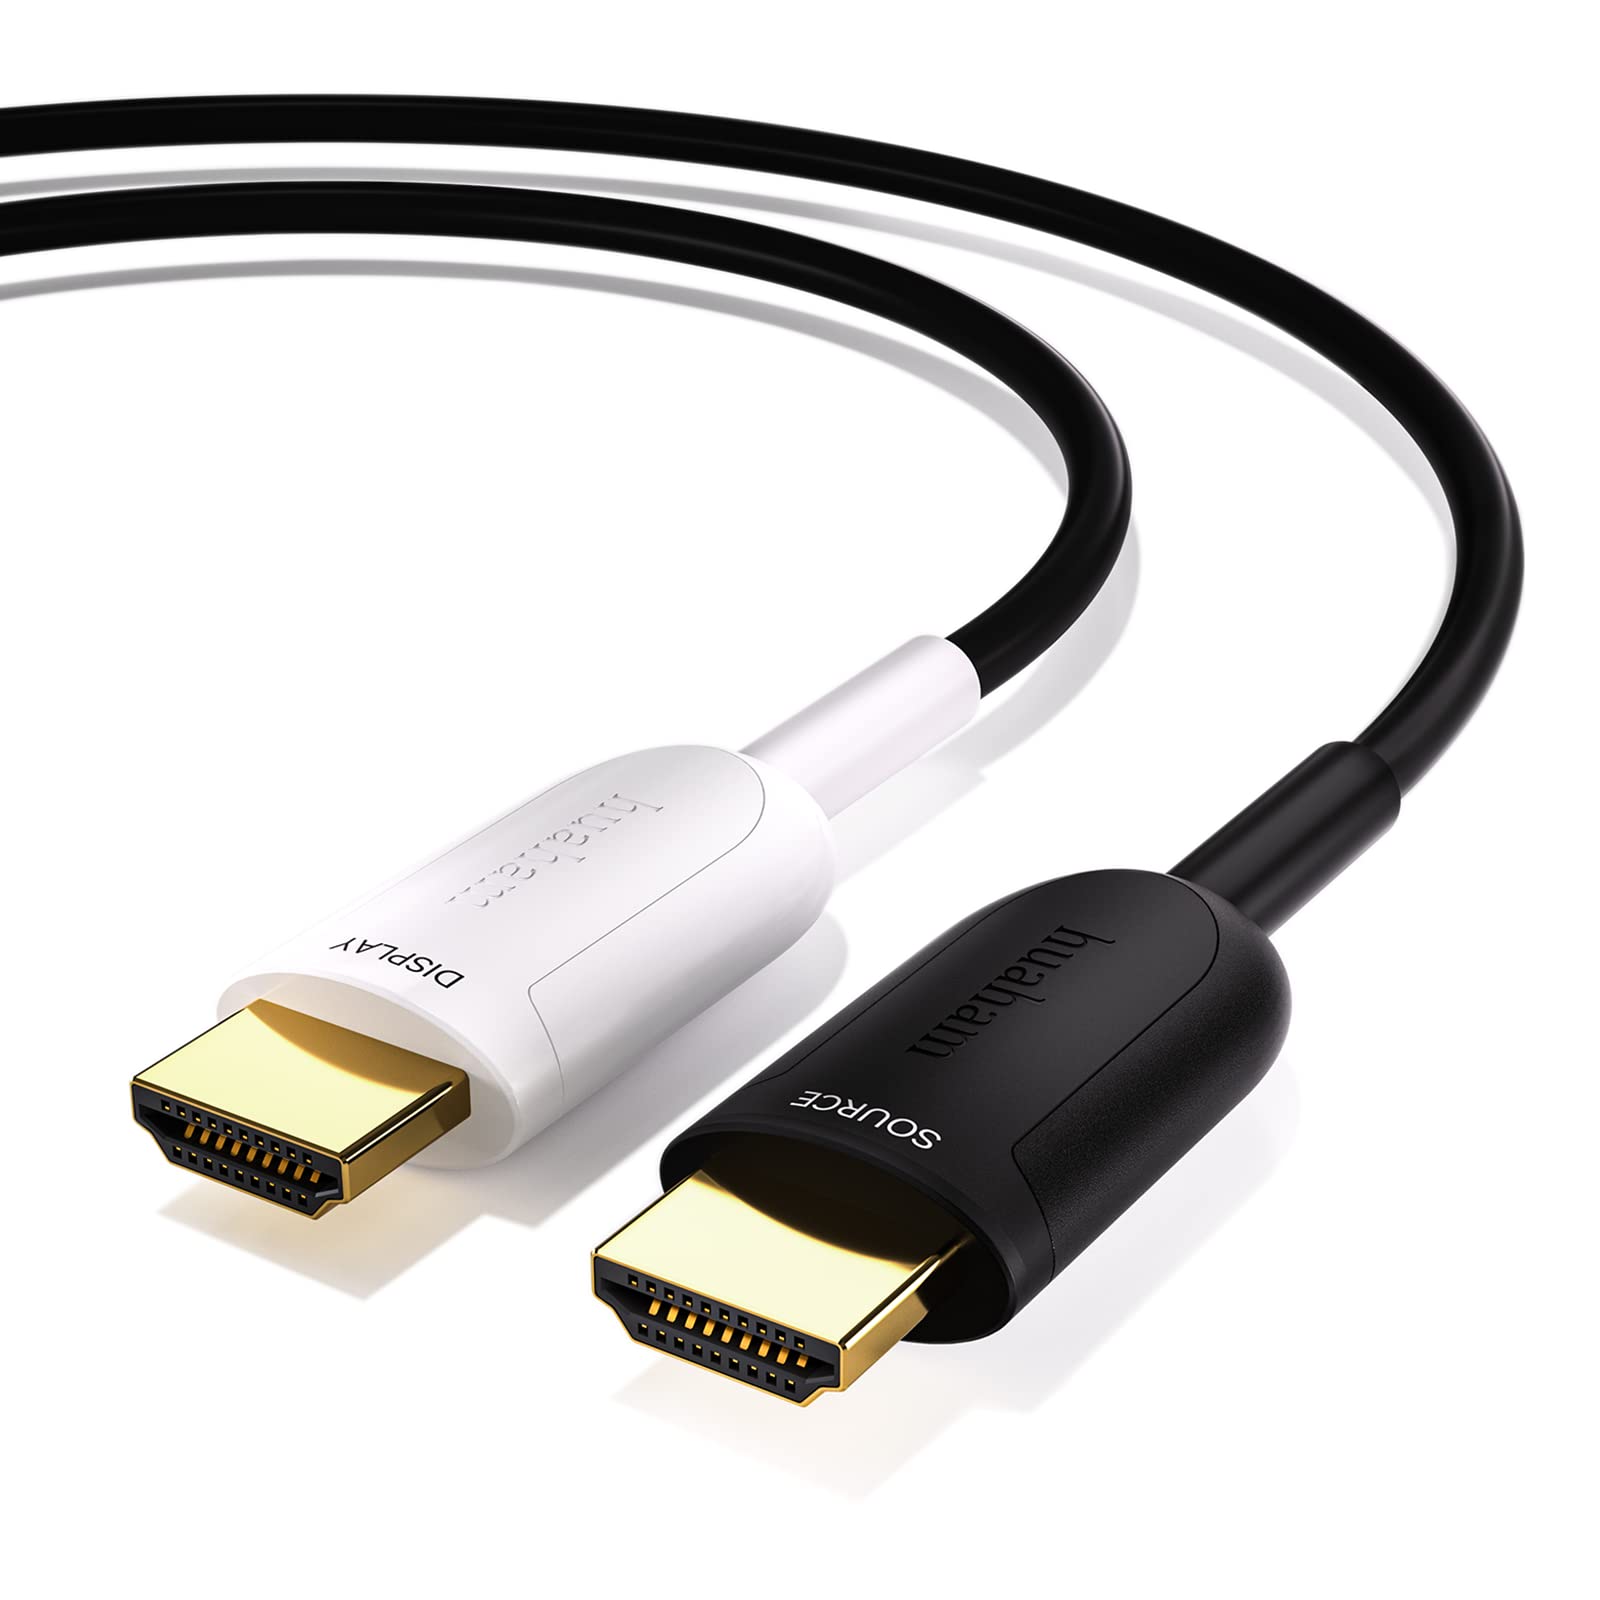 Damaged HDMI cable
TV compatibility issues